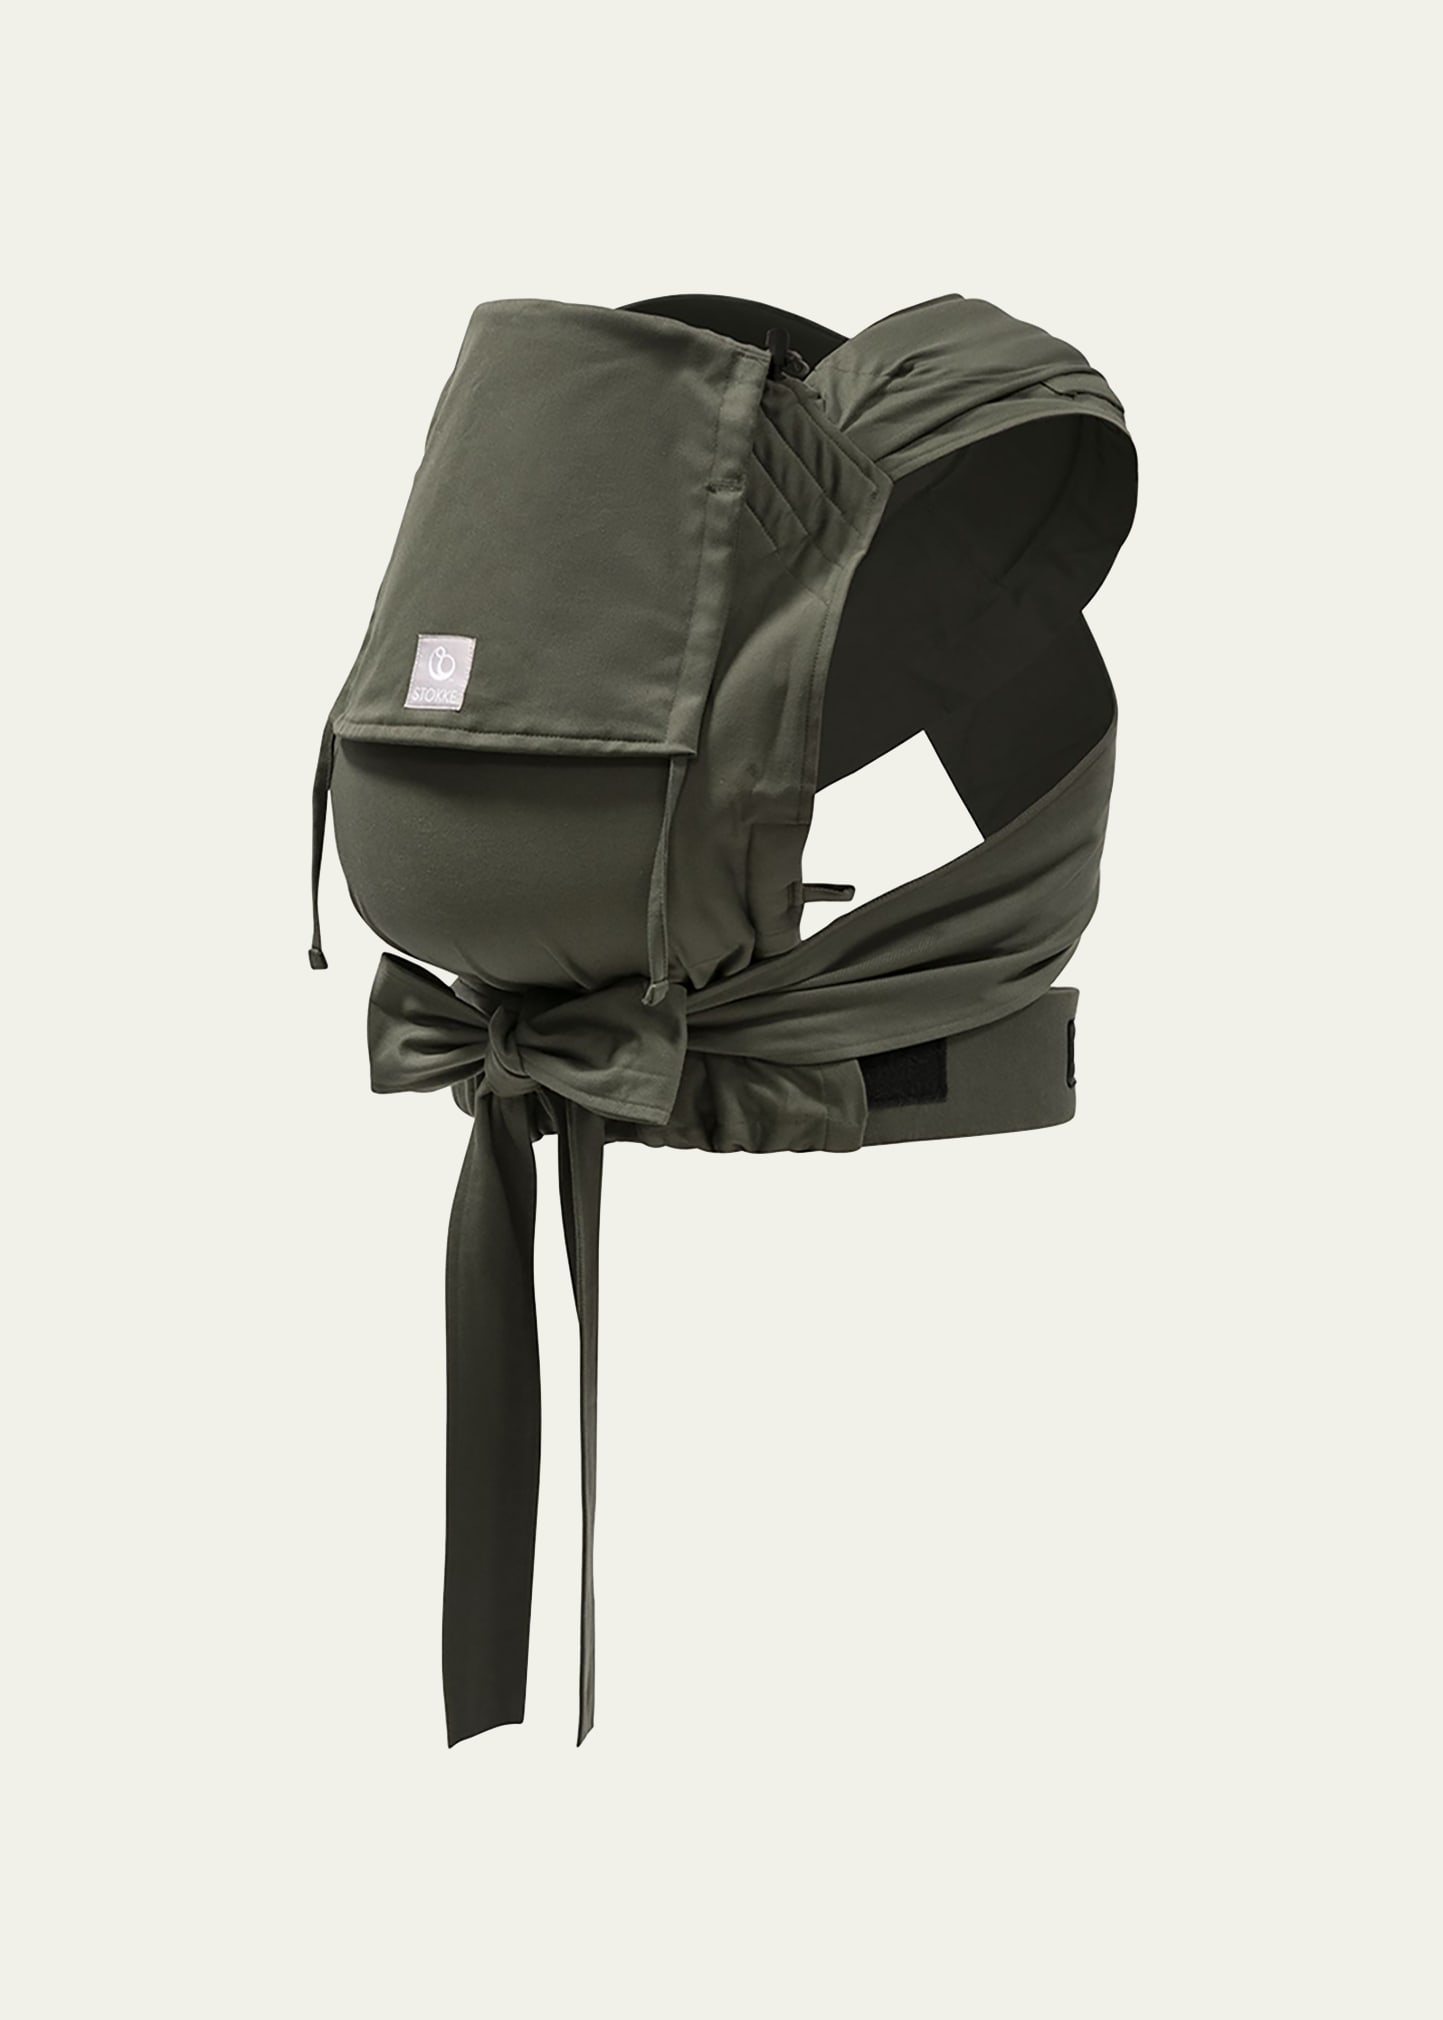 STOKKE LIMAS BABY CARRIER